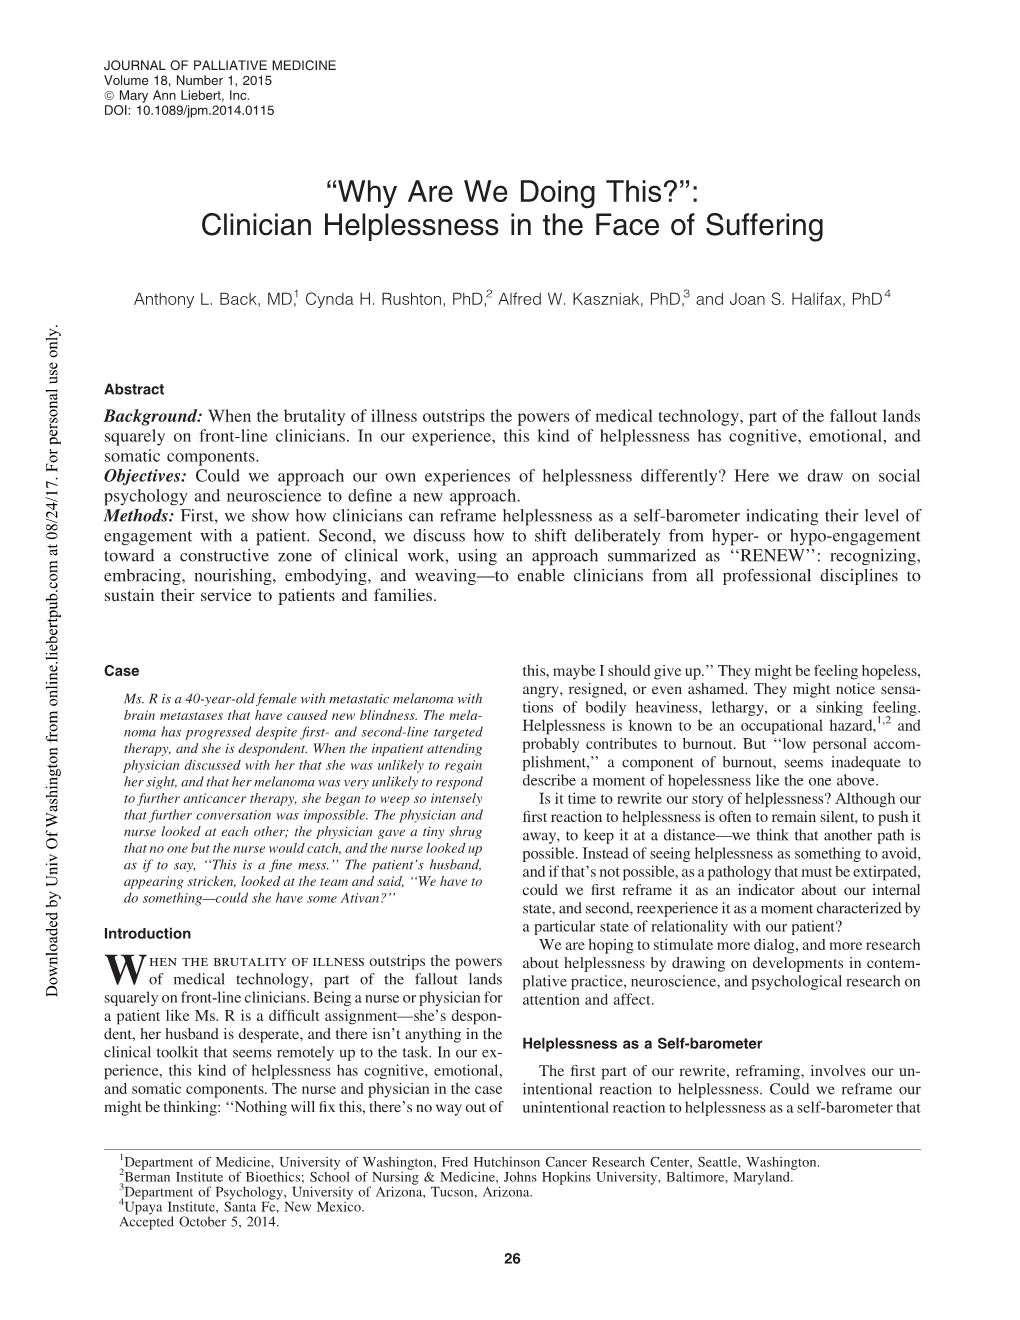 “Why Are We Doing This?”: Clinician Helplessness in the Face of Suffering